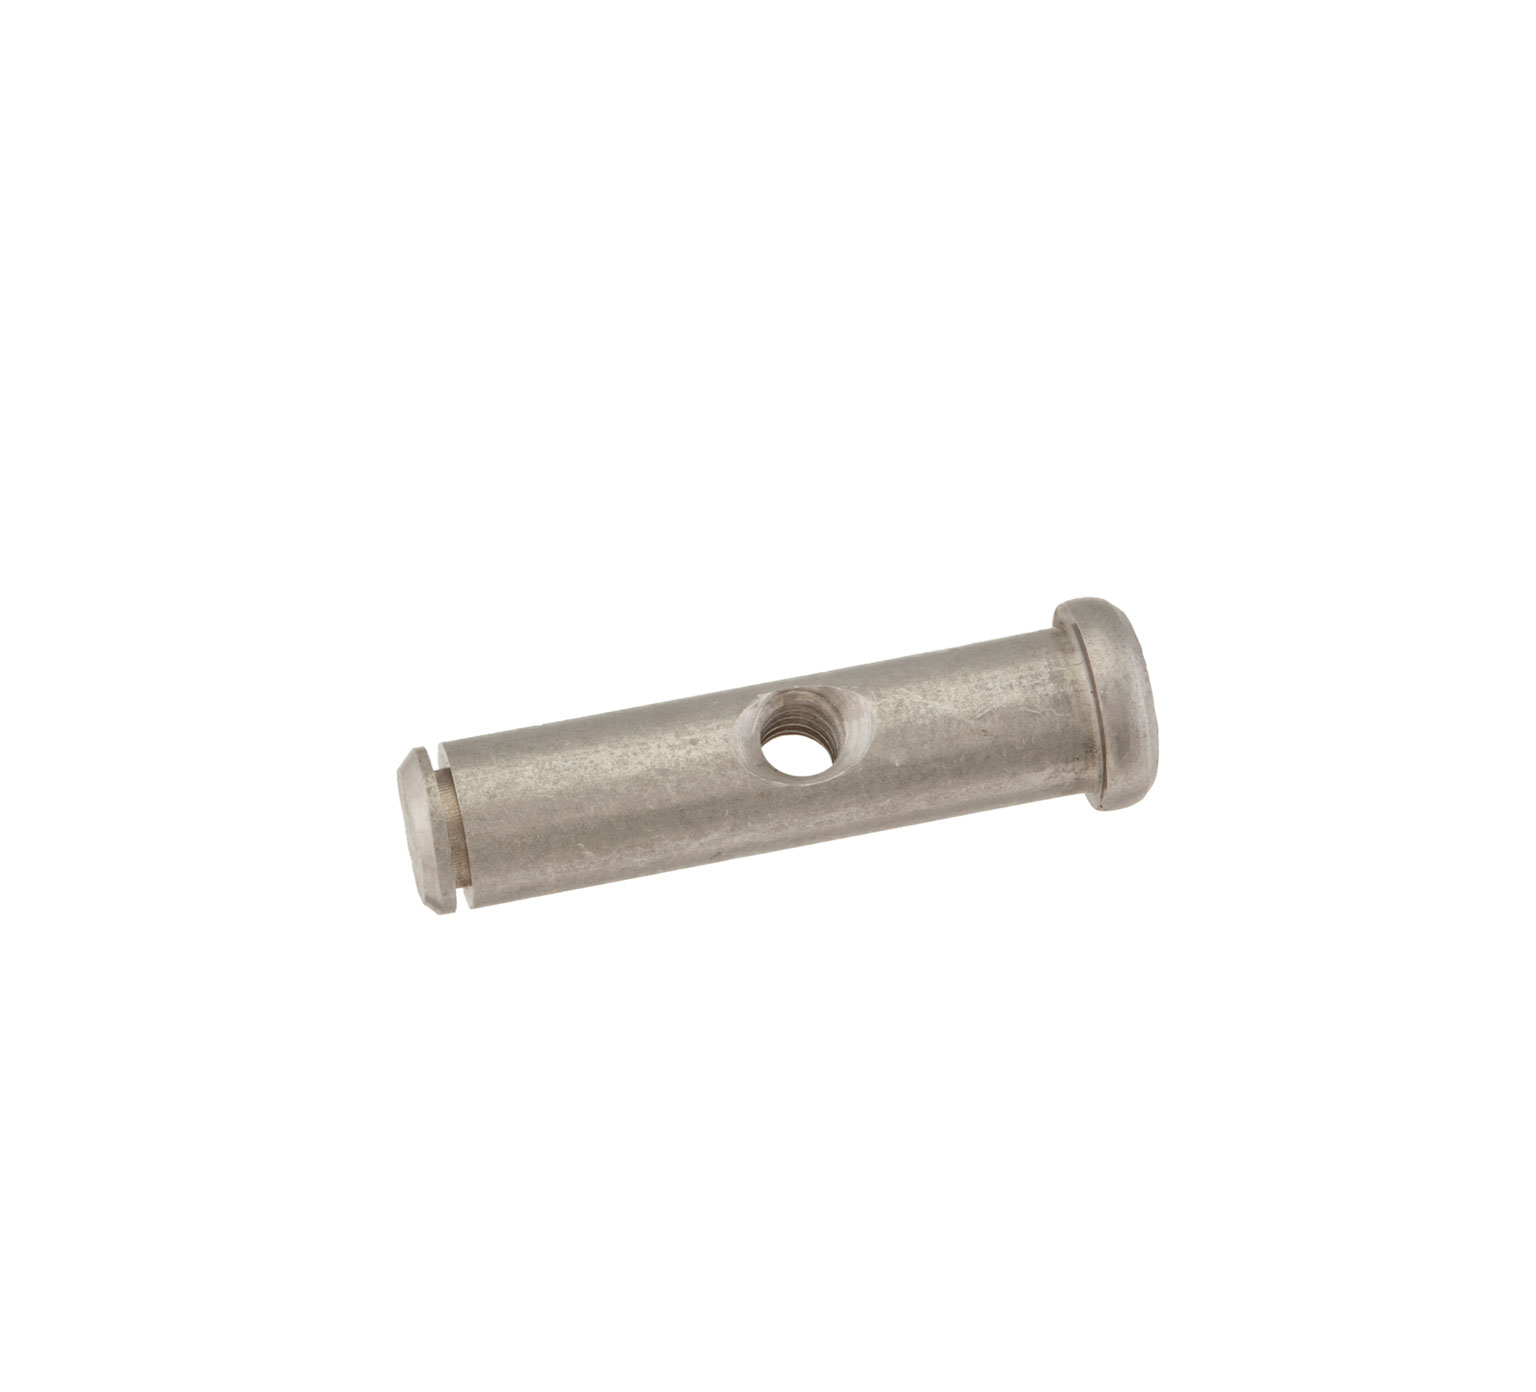 21603 Stainless Steel Pin - 1.92 x 0.56 in alt 1